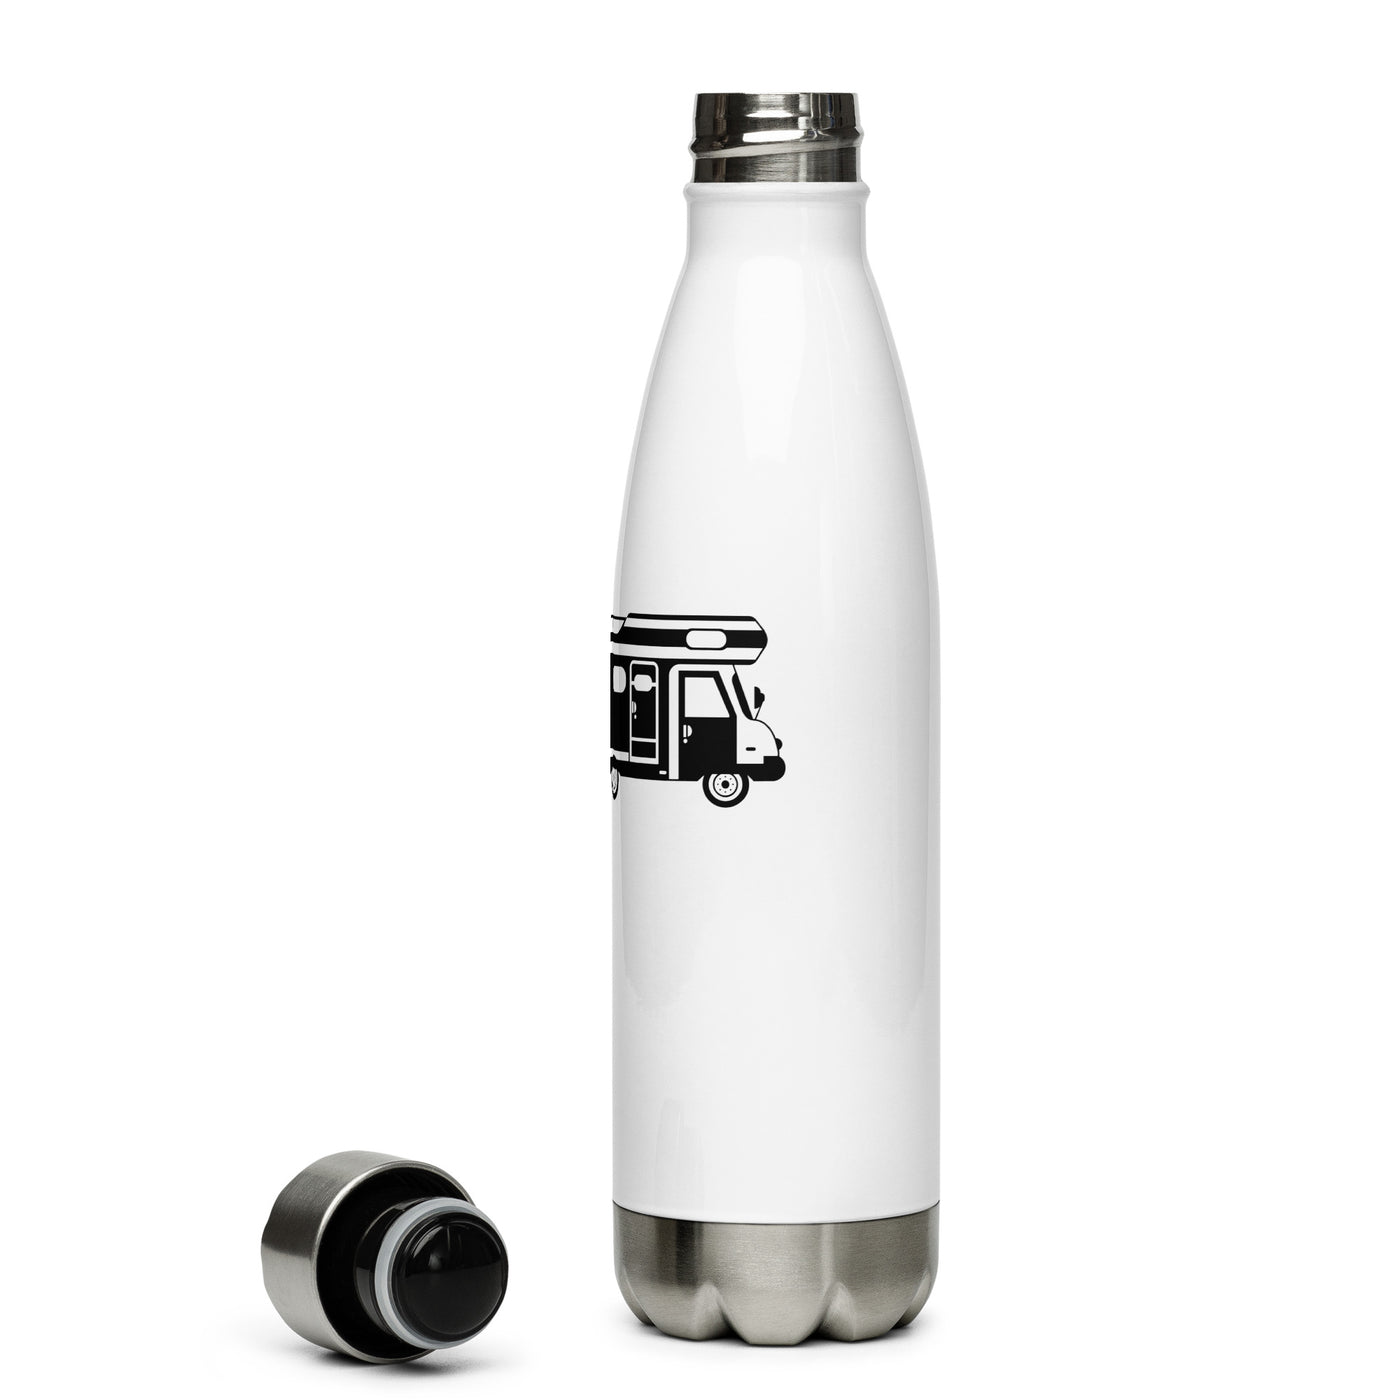 Hashtag - Wohnmobil - Edelstahl Trinkflasche camping